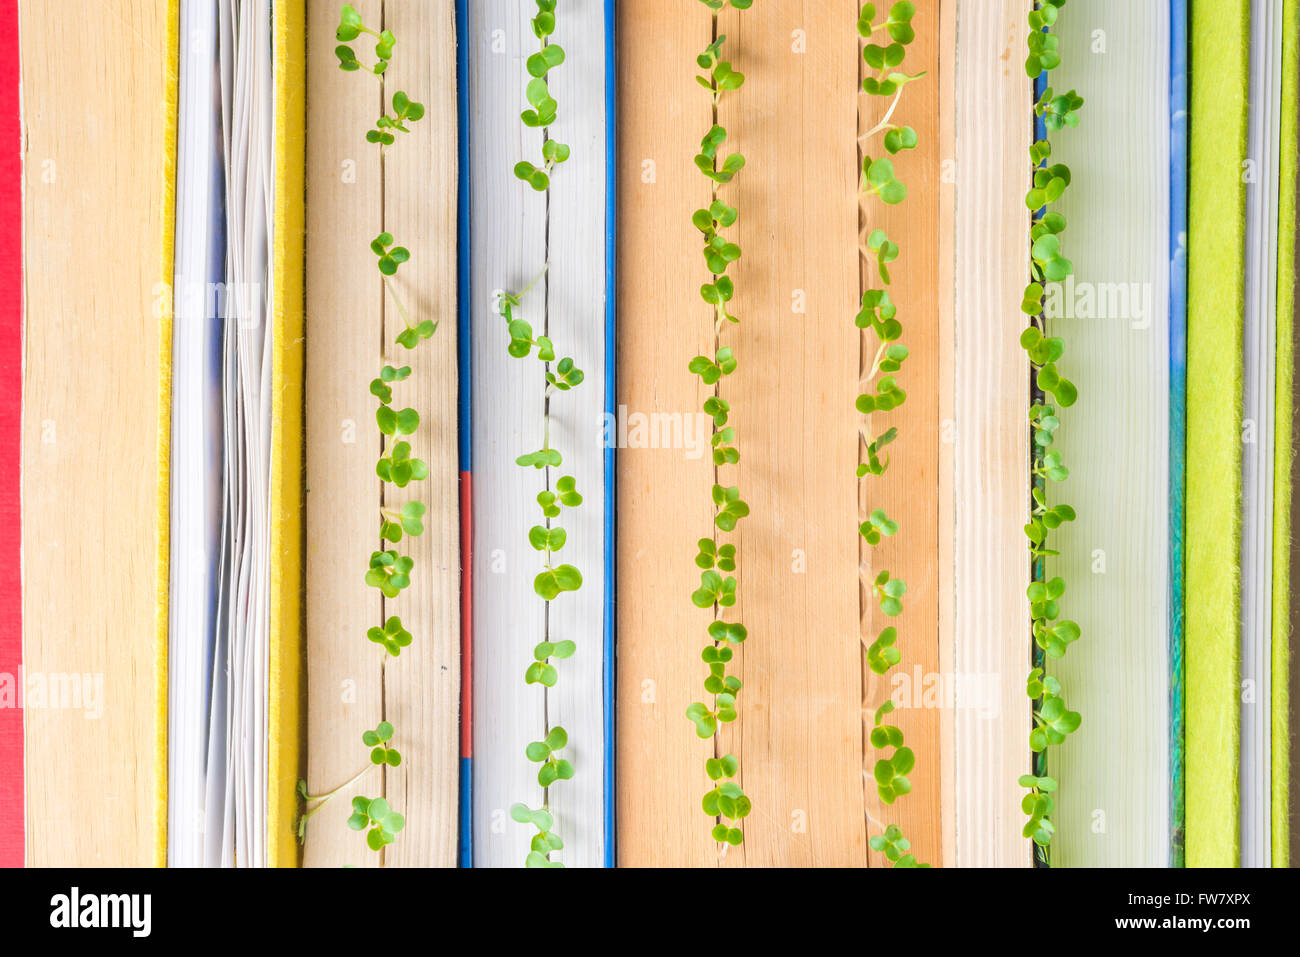 Green plants  growing in books signifying knowledge, wisdom, learning and new ideas Stock Photo